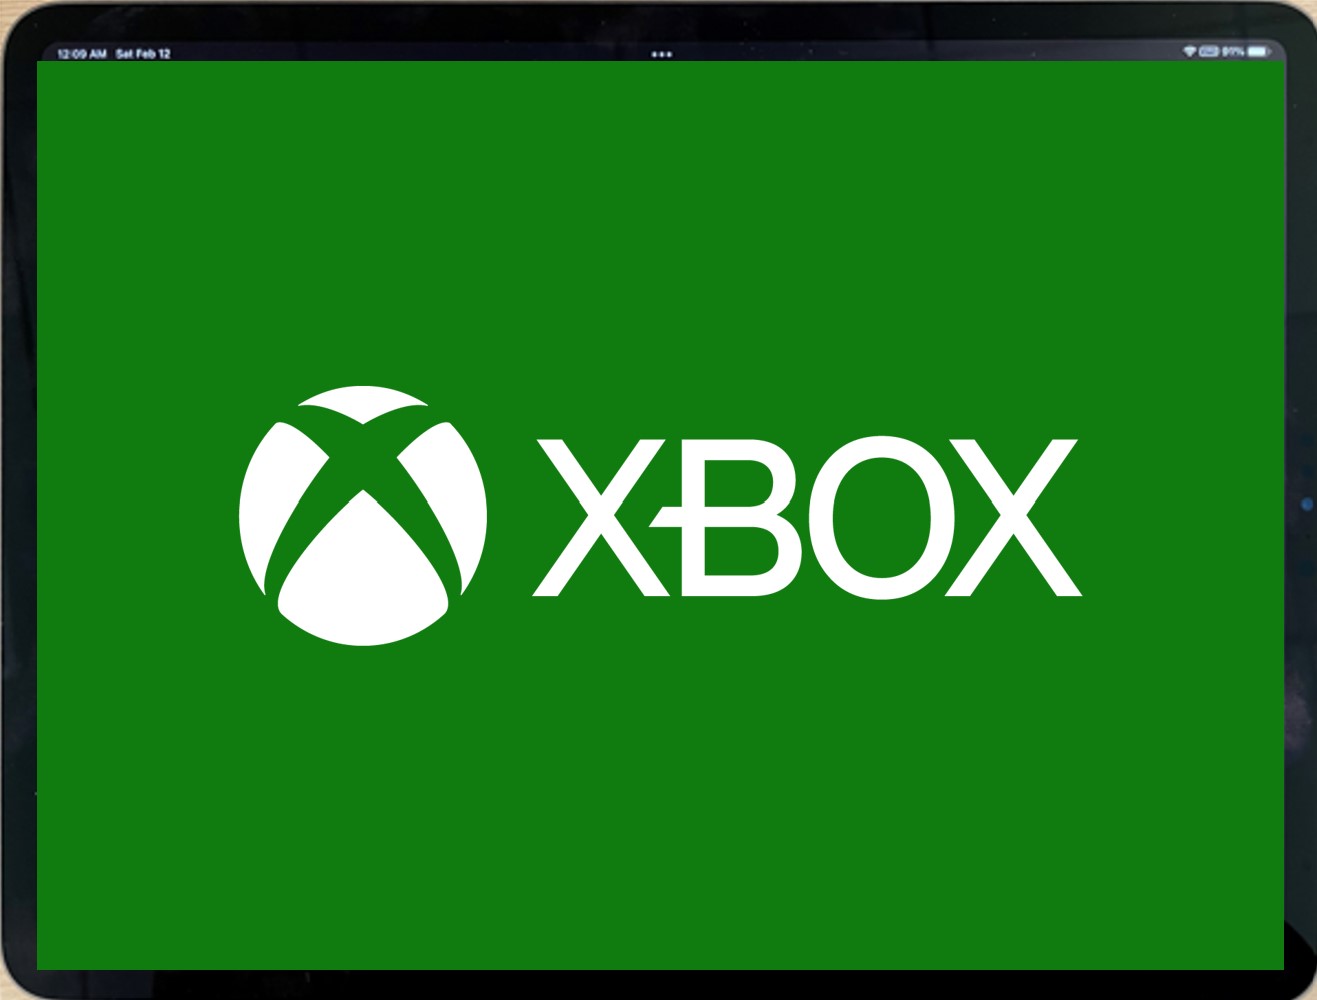 The Xbox logo filling the screen of a landscape tablet